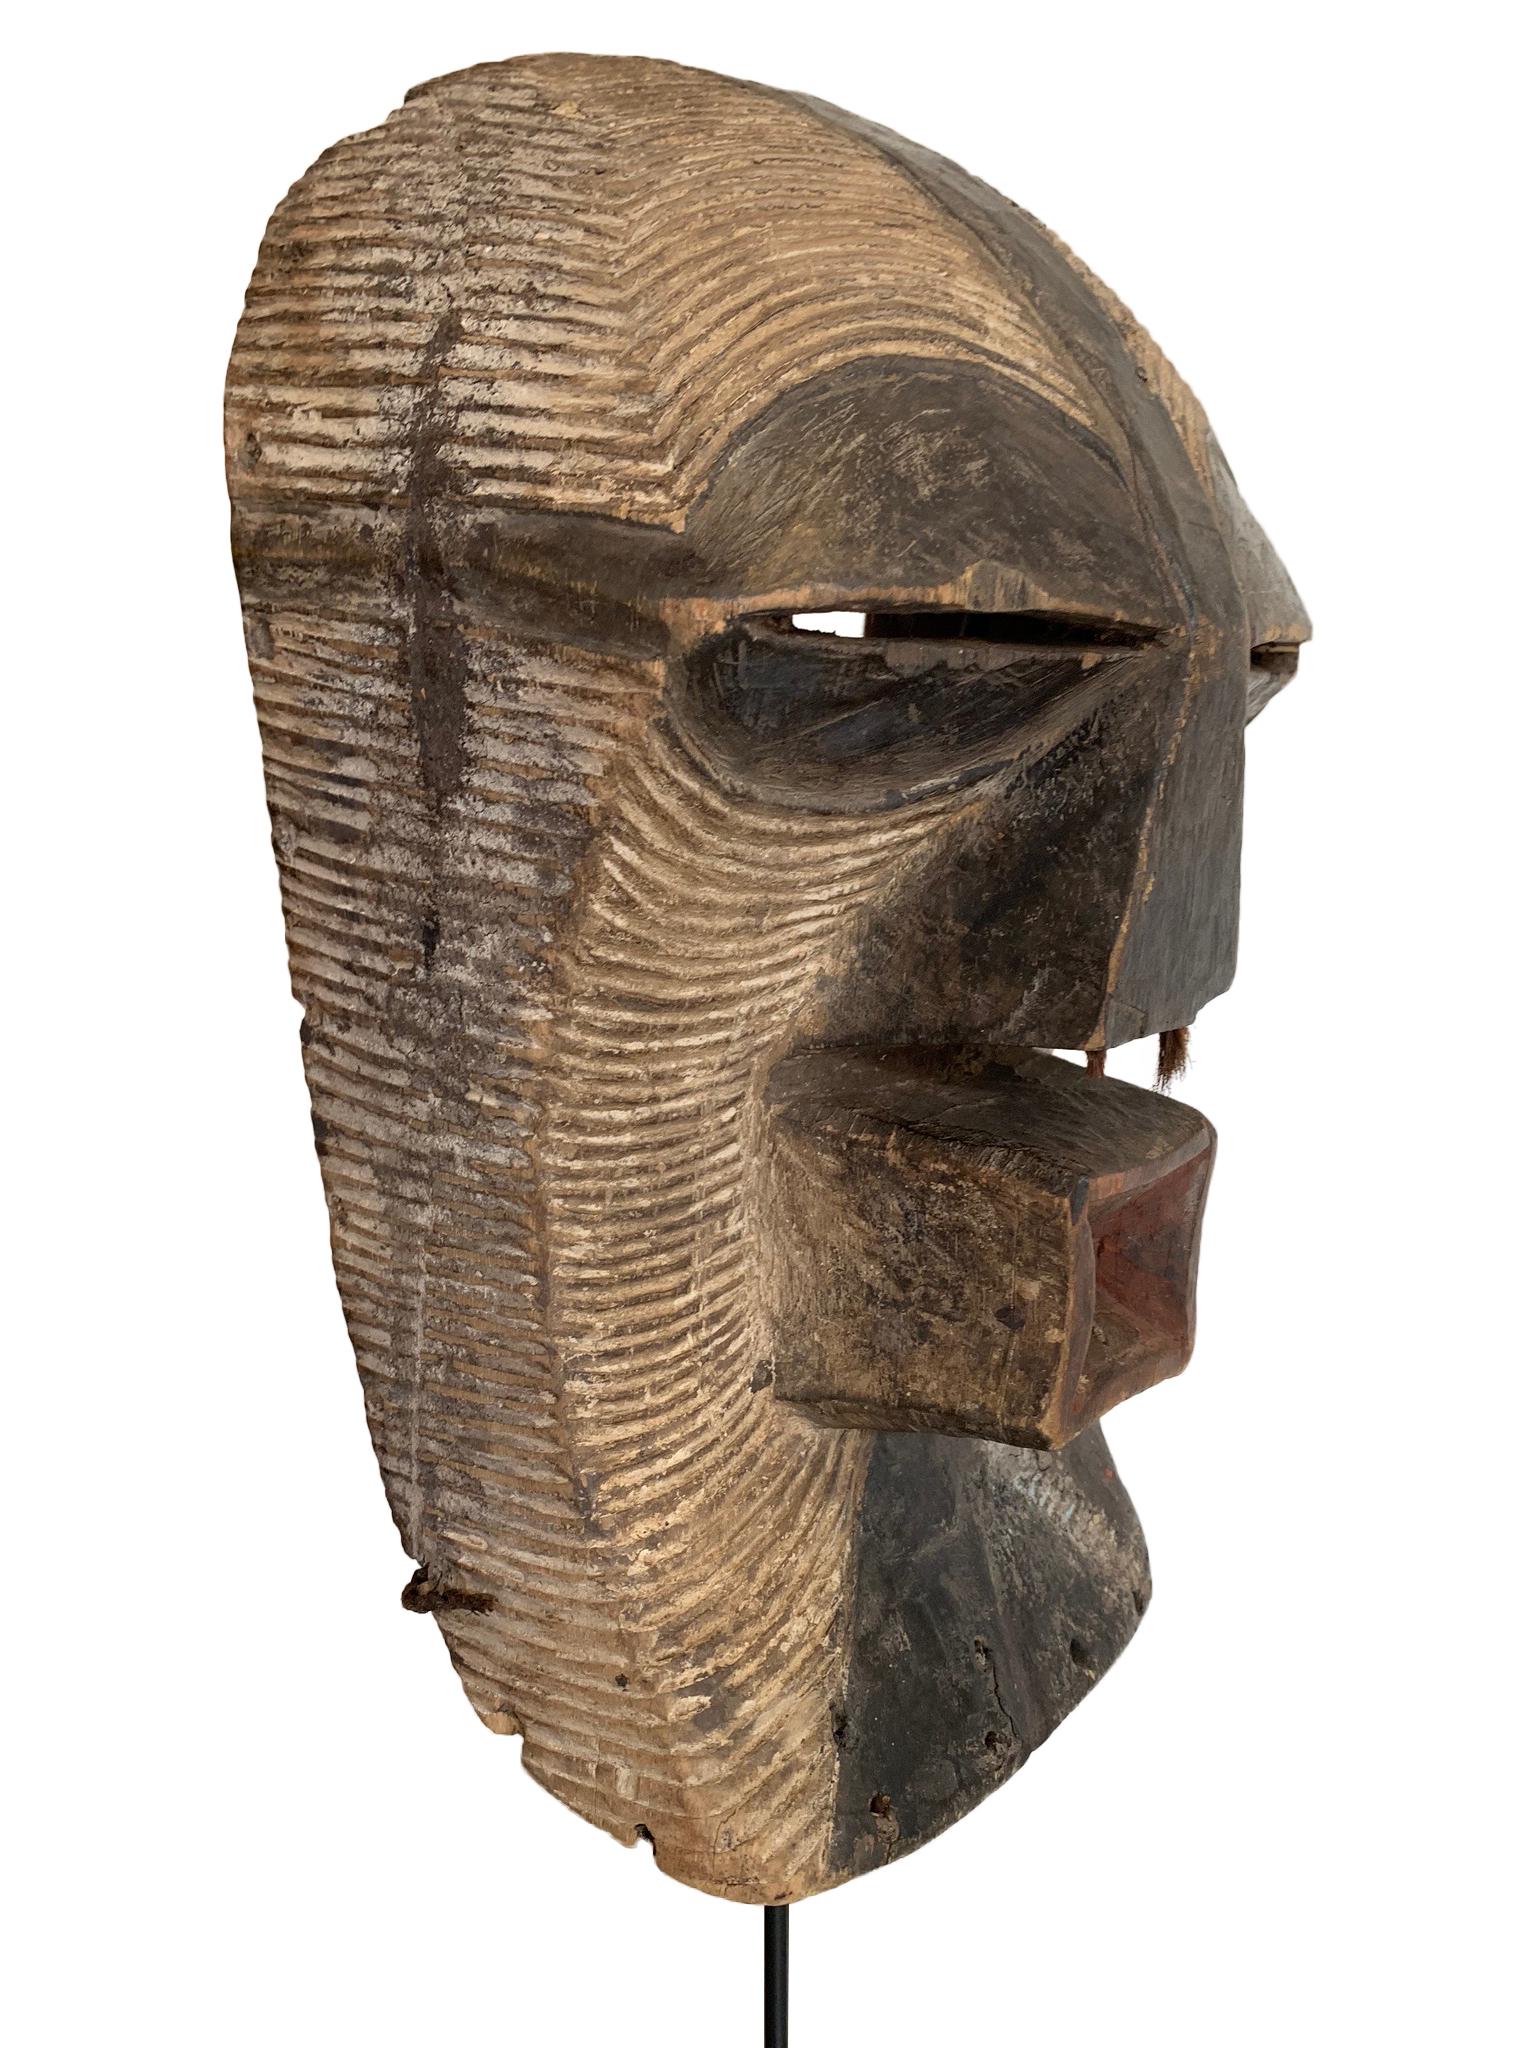 A female Songye Kifwebe hand carved wooden ceremonial mask. The wooden mask is carved with geometric lines on the face and head which are whitened with pigment and darkened on the large ridged nose and eyes, with red pigment around the mouth, the